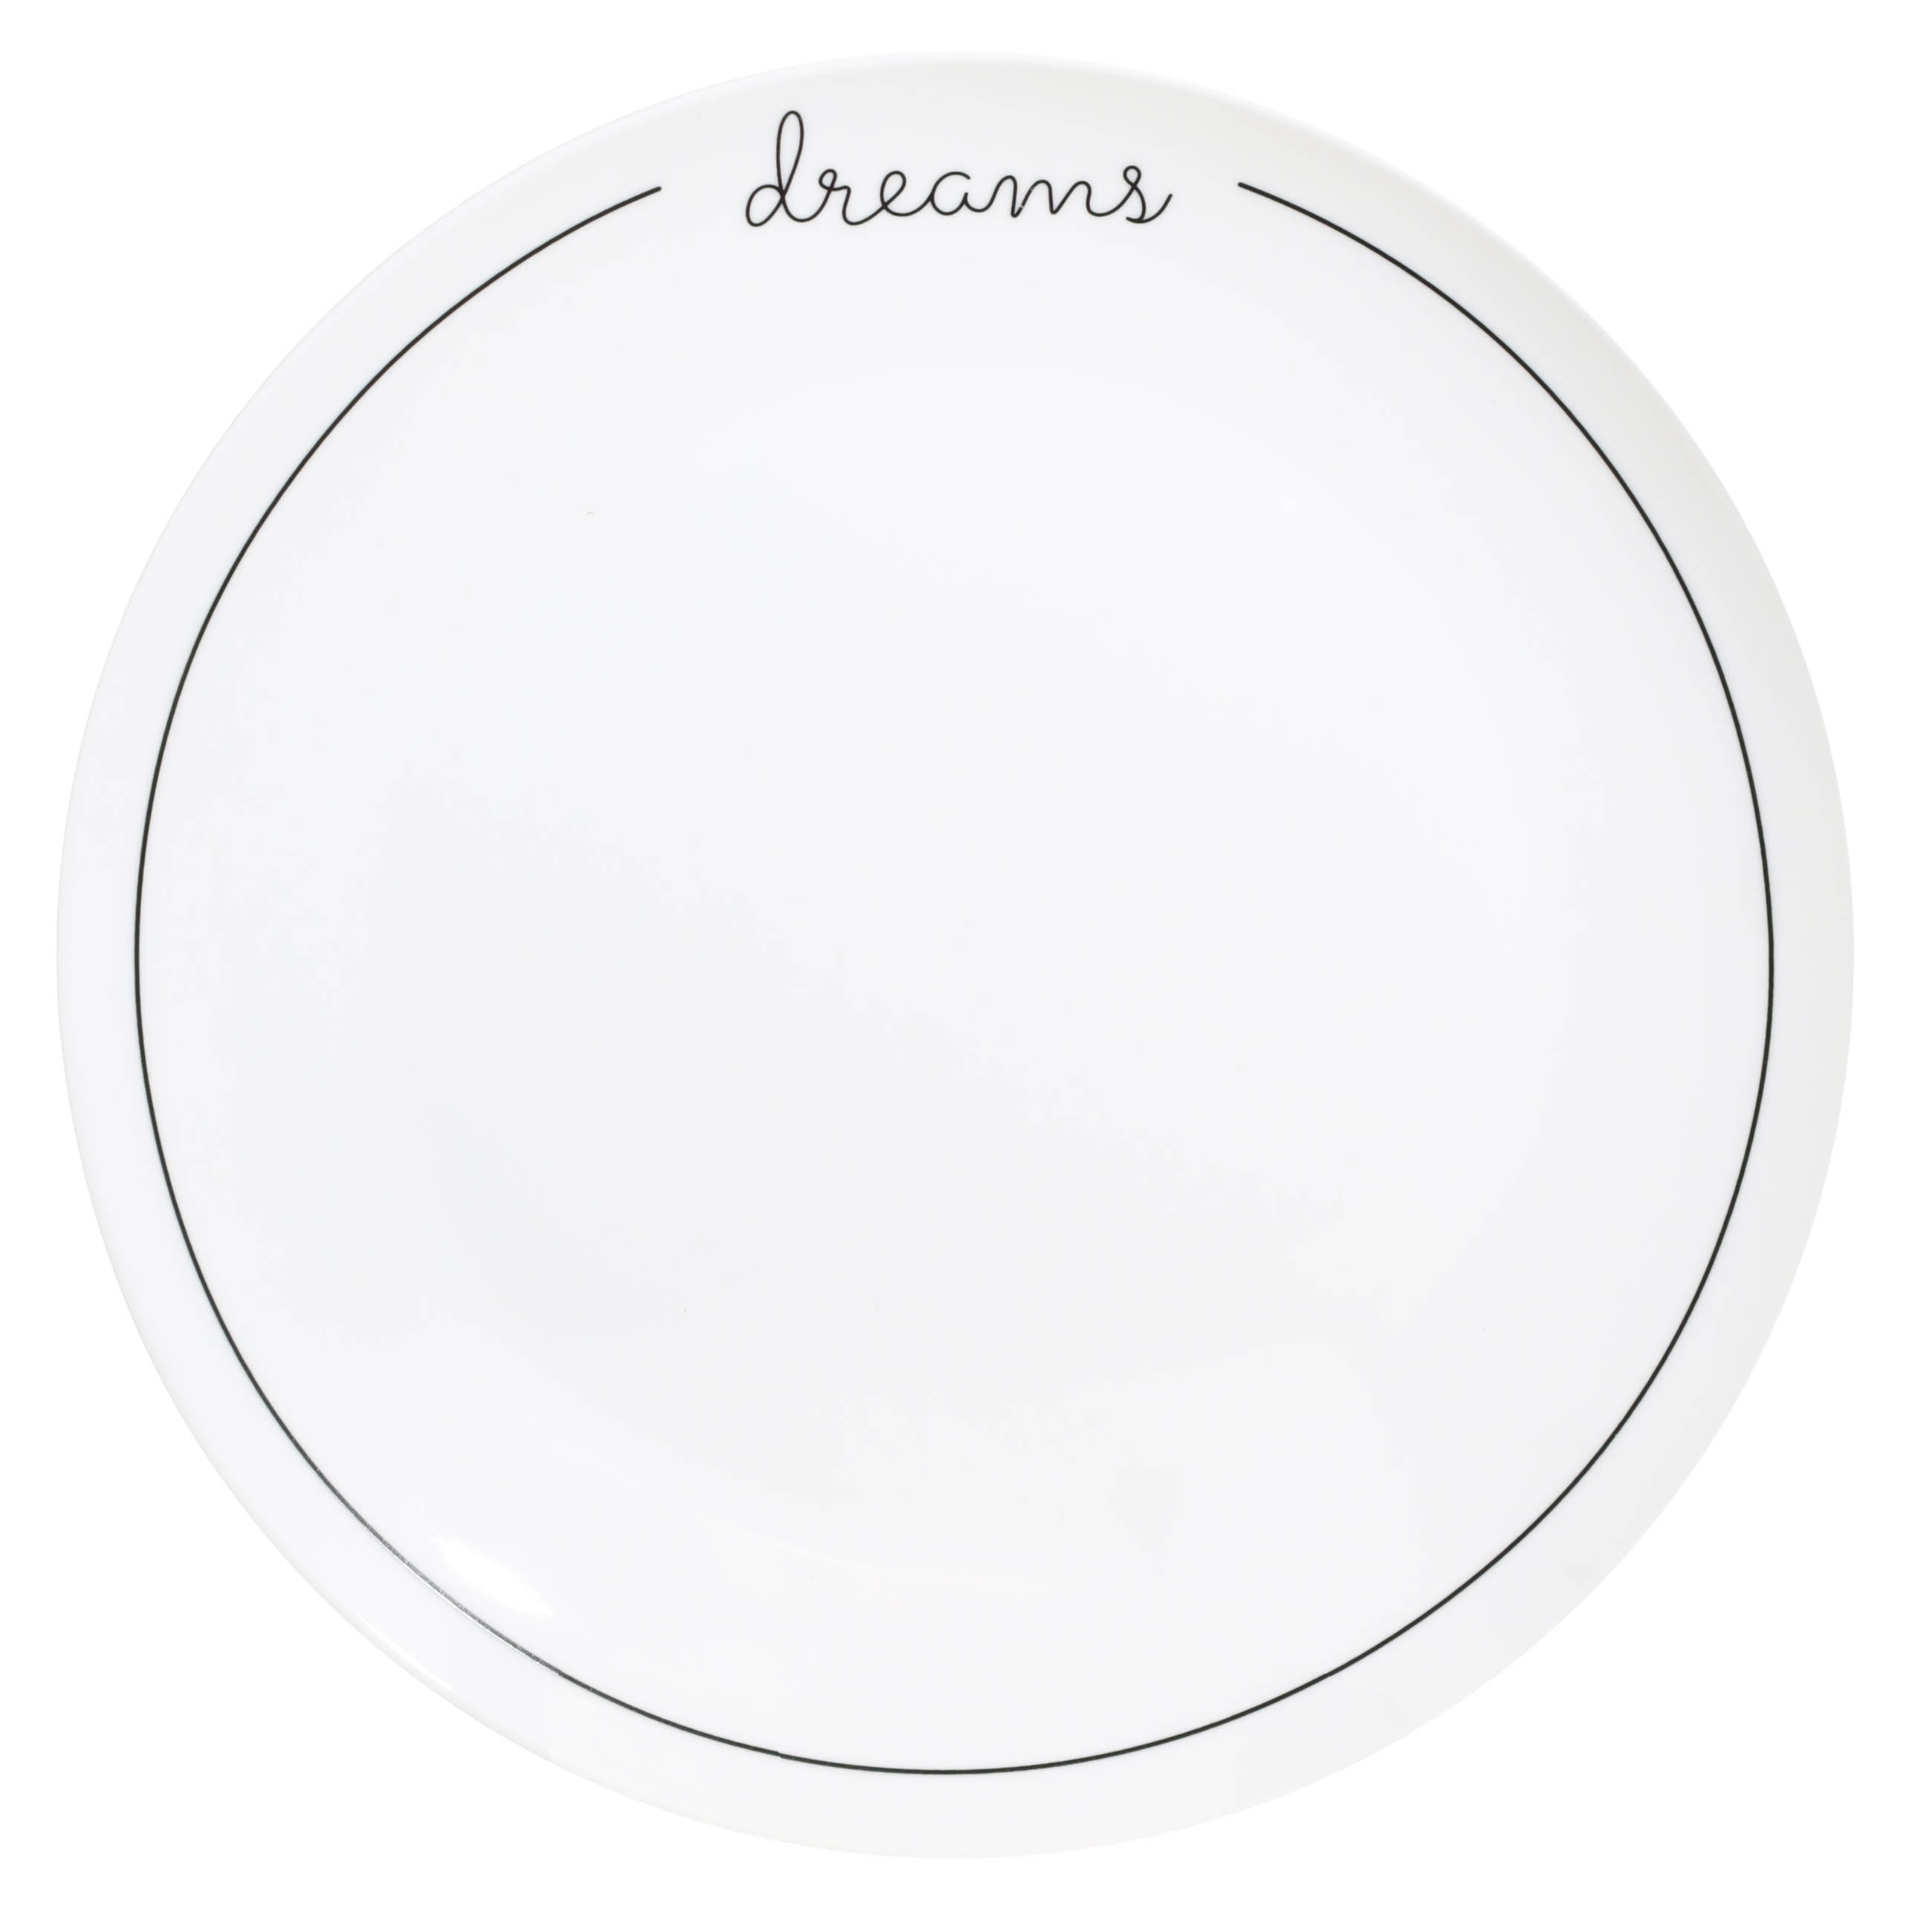 Dining set, 6 persons, 19 items, porcelain N, white, Home / Dreams/Family, Scroll white изображение № 2